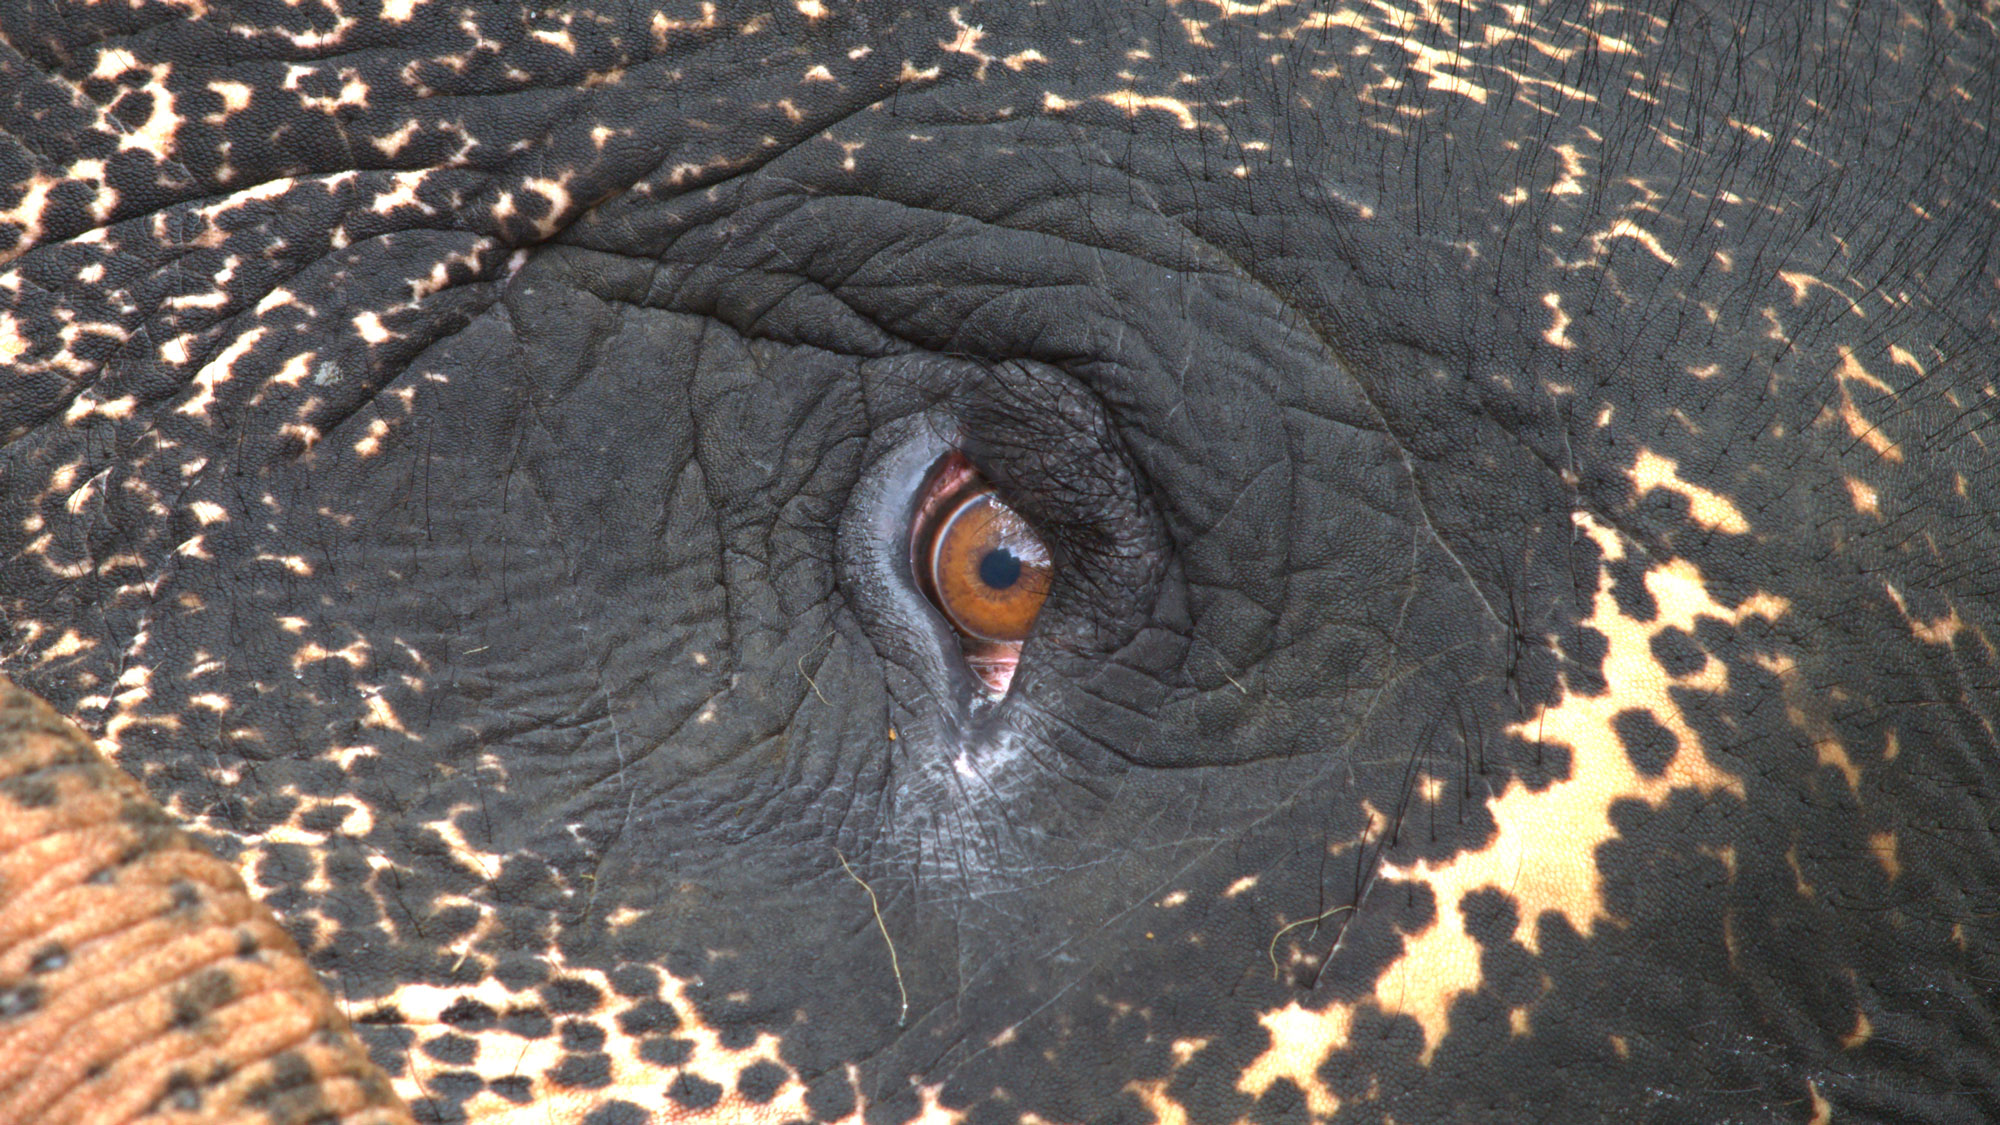 A tight shot of the eye of an elephant. 